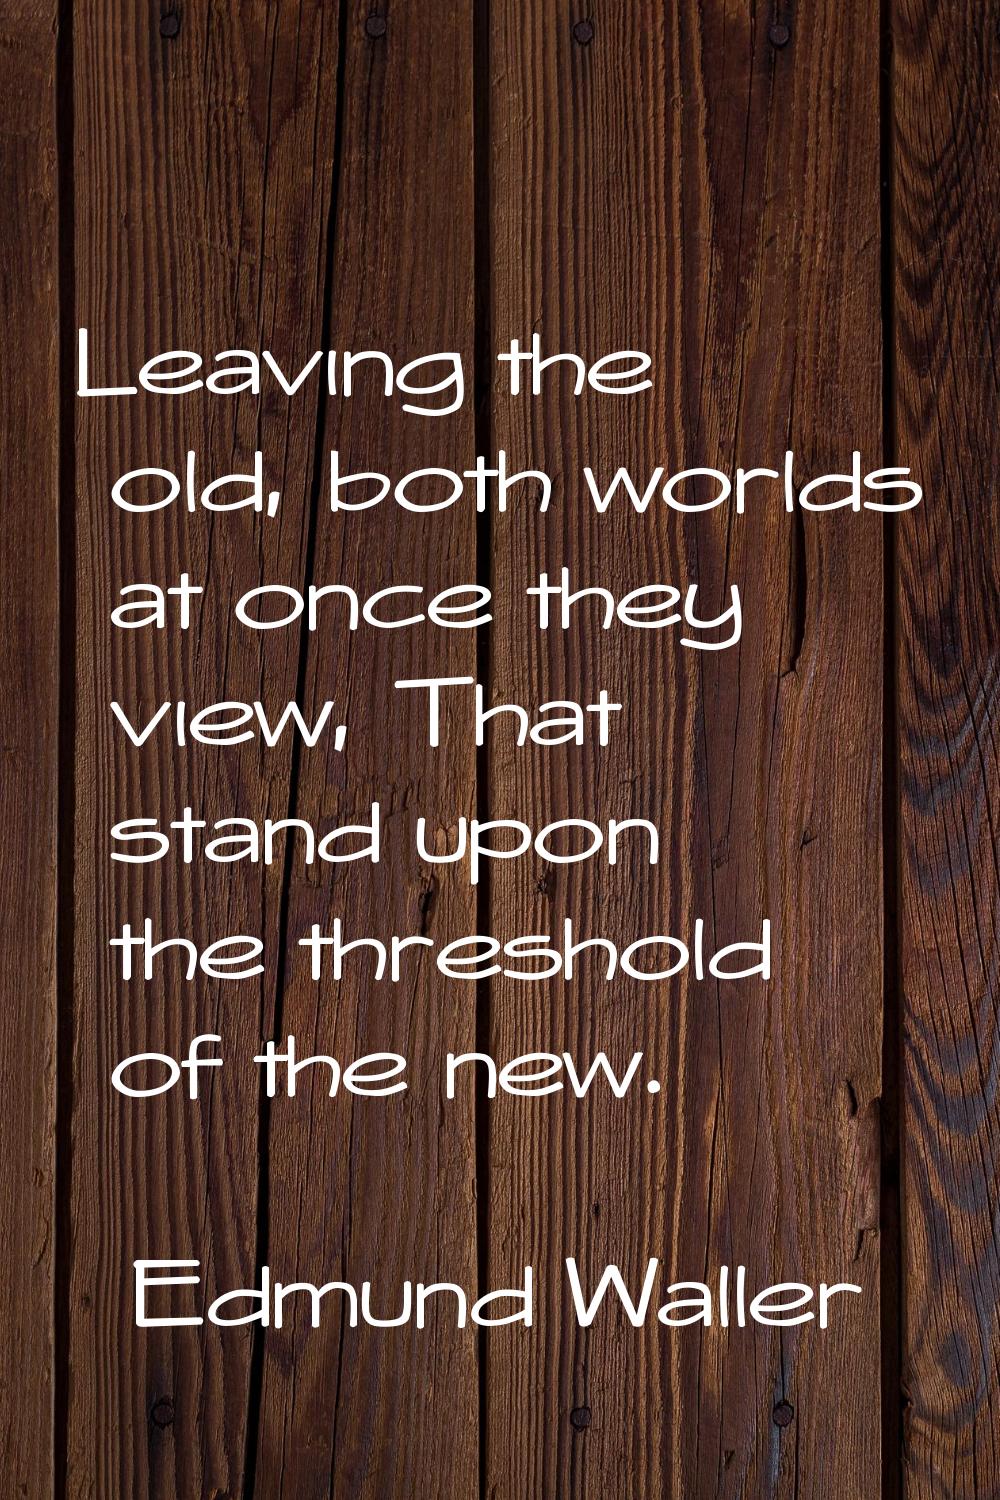 Leaving the old, both worlds at once they view, That stand upon the threshold of the new.